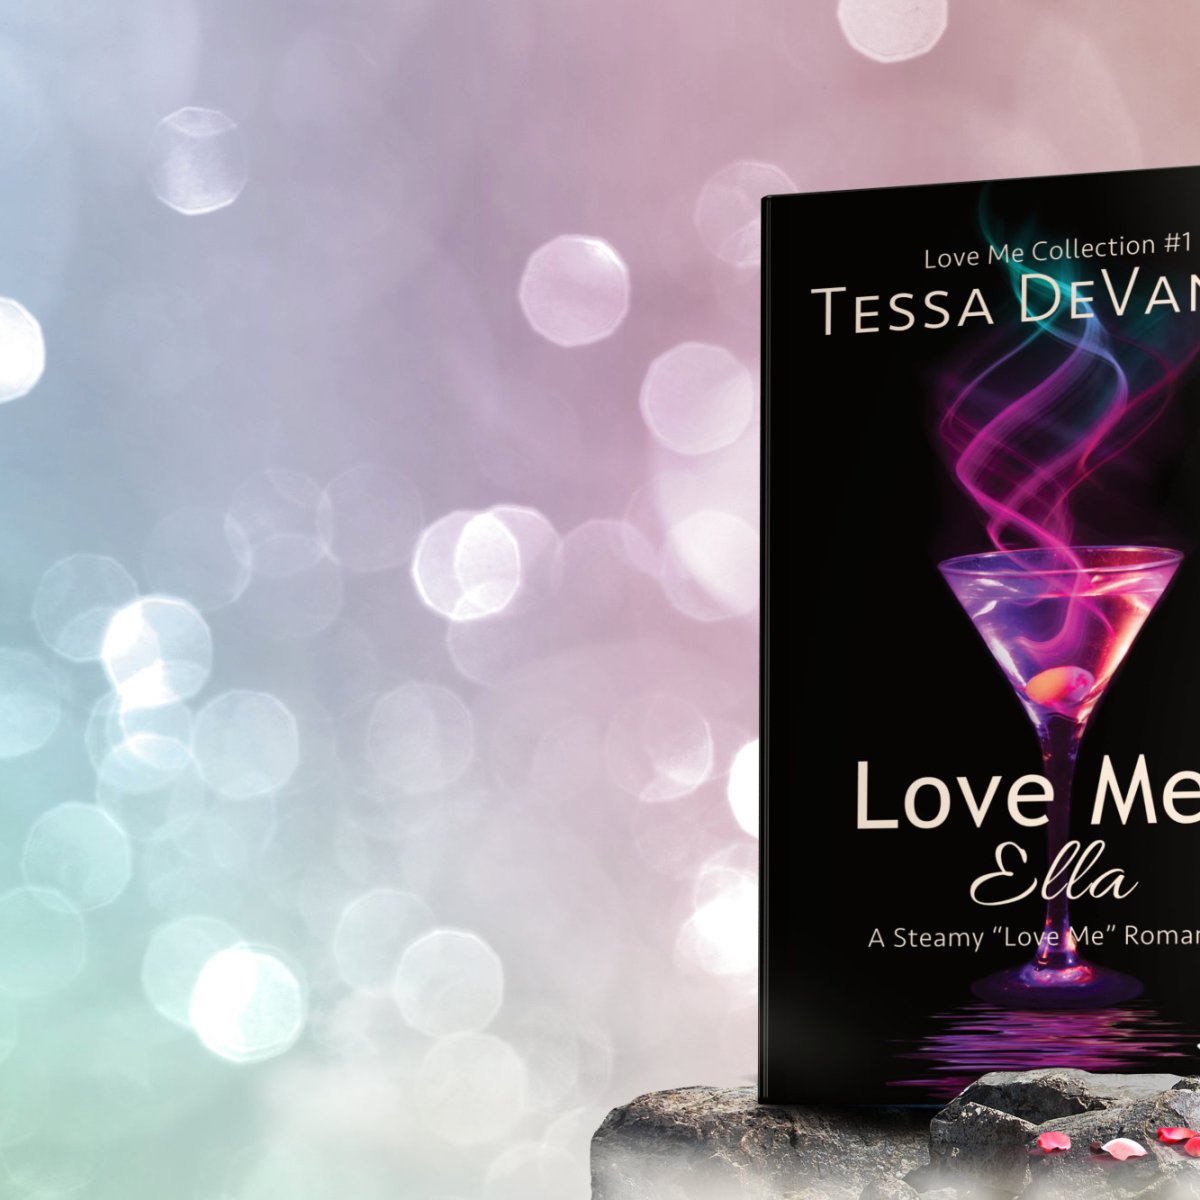 Love Me, Ella is now available worldwide in ebook! Coming soon in paperback (worldwide) and hardcover (Barnes&Noble).